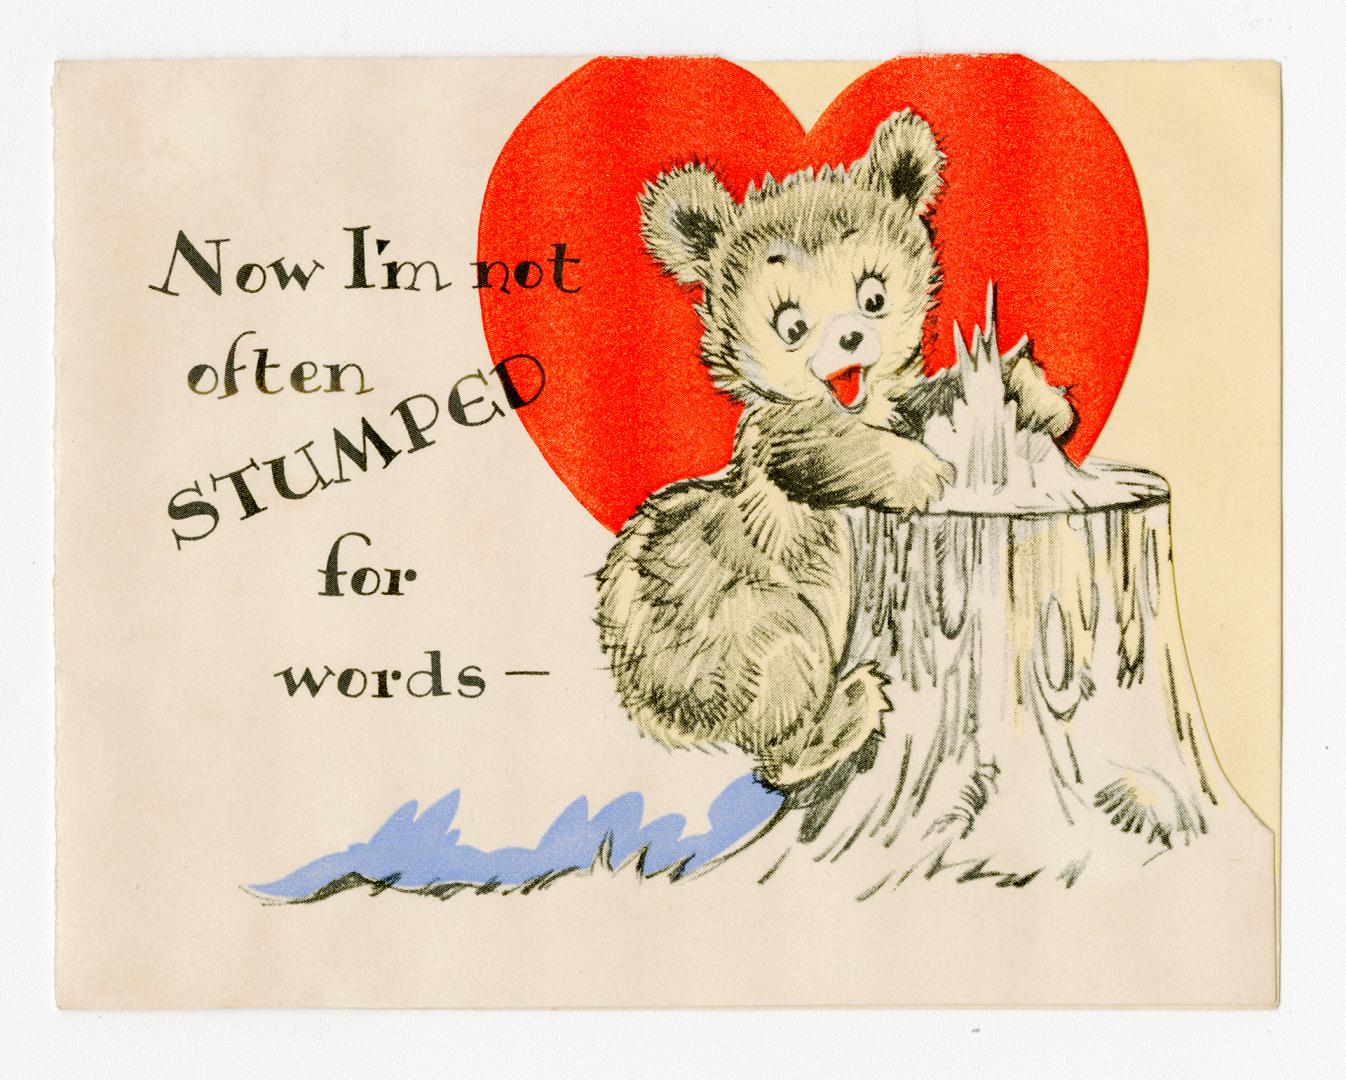 A bear cub climbs a tree strump. A red heart is in the background. A verse is written on the le ...